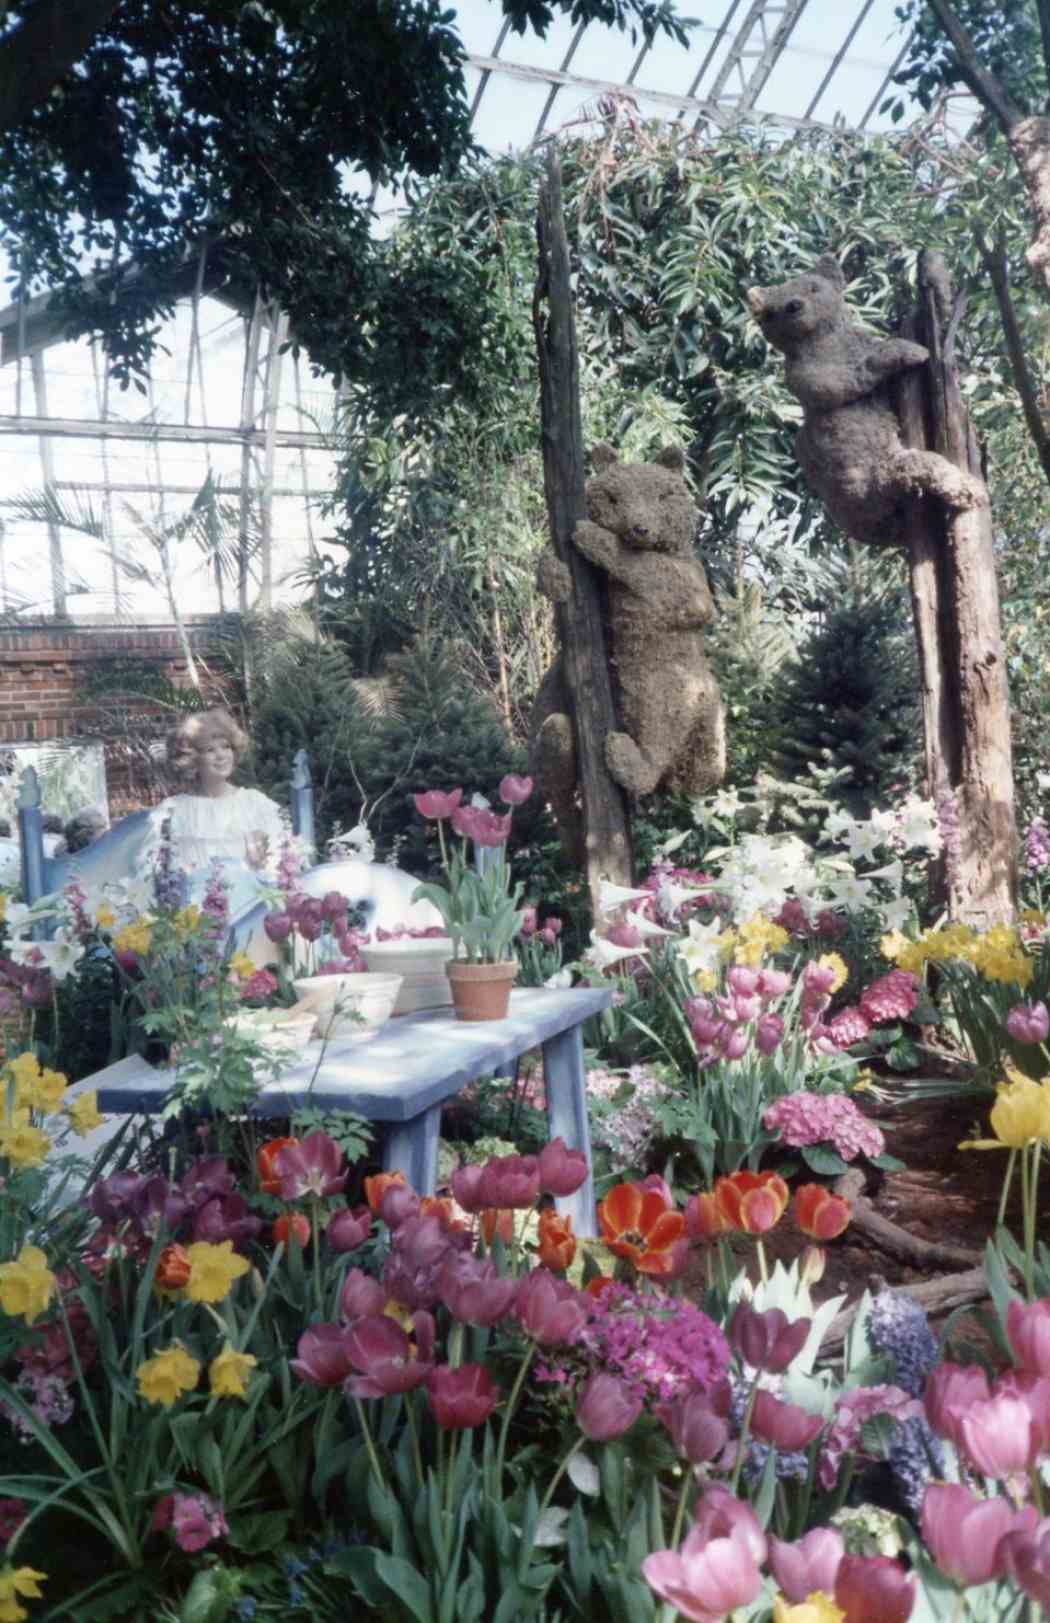 Spring Flower Show 1986: The Enchanted Forest